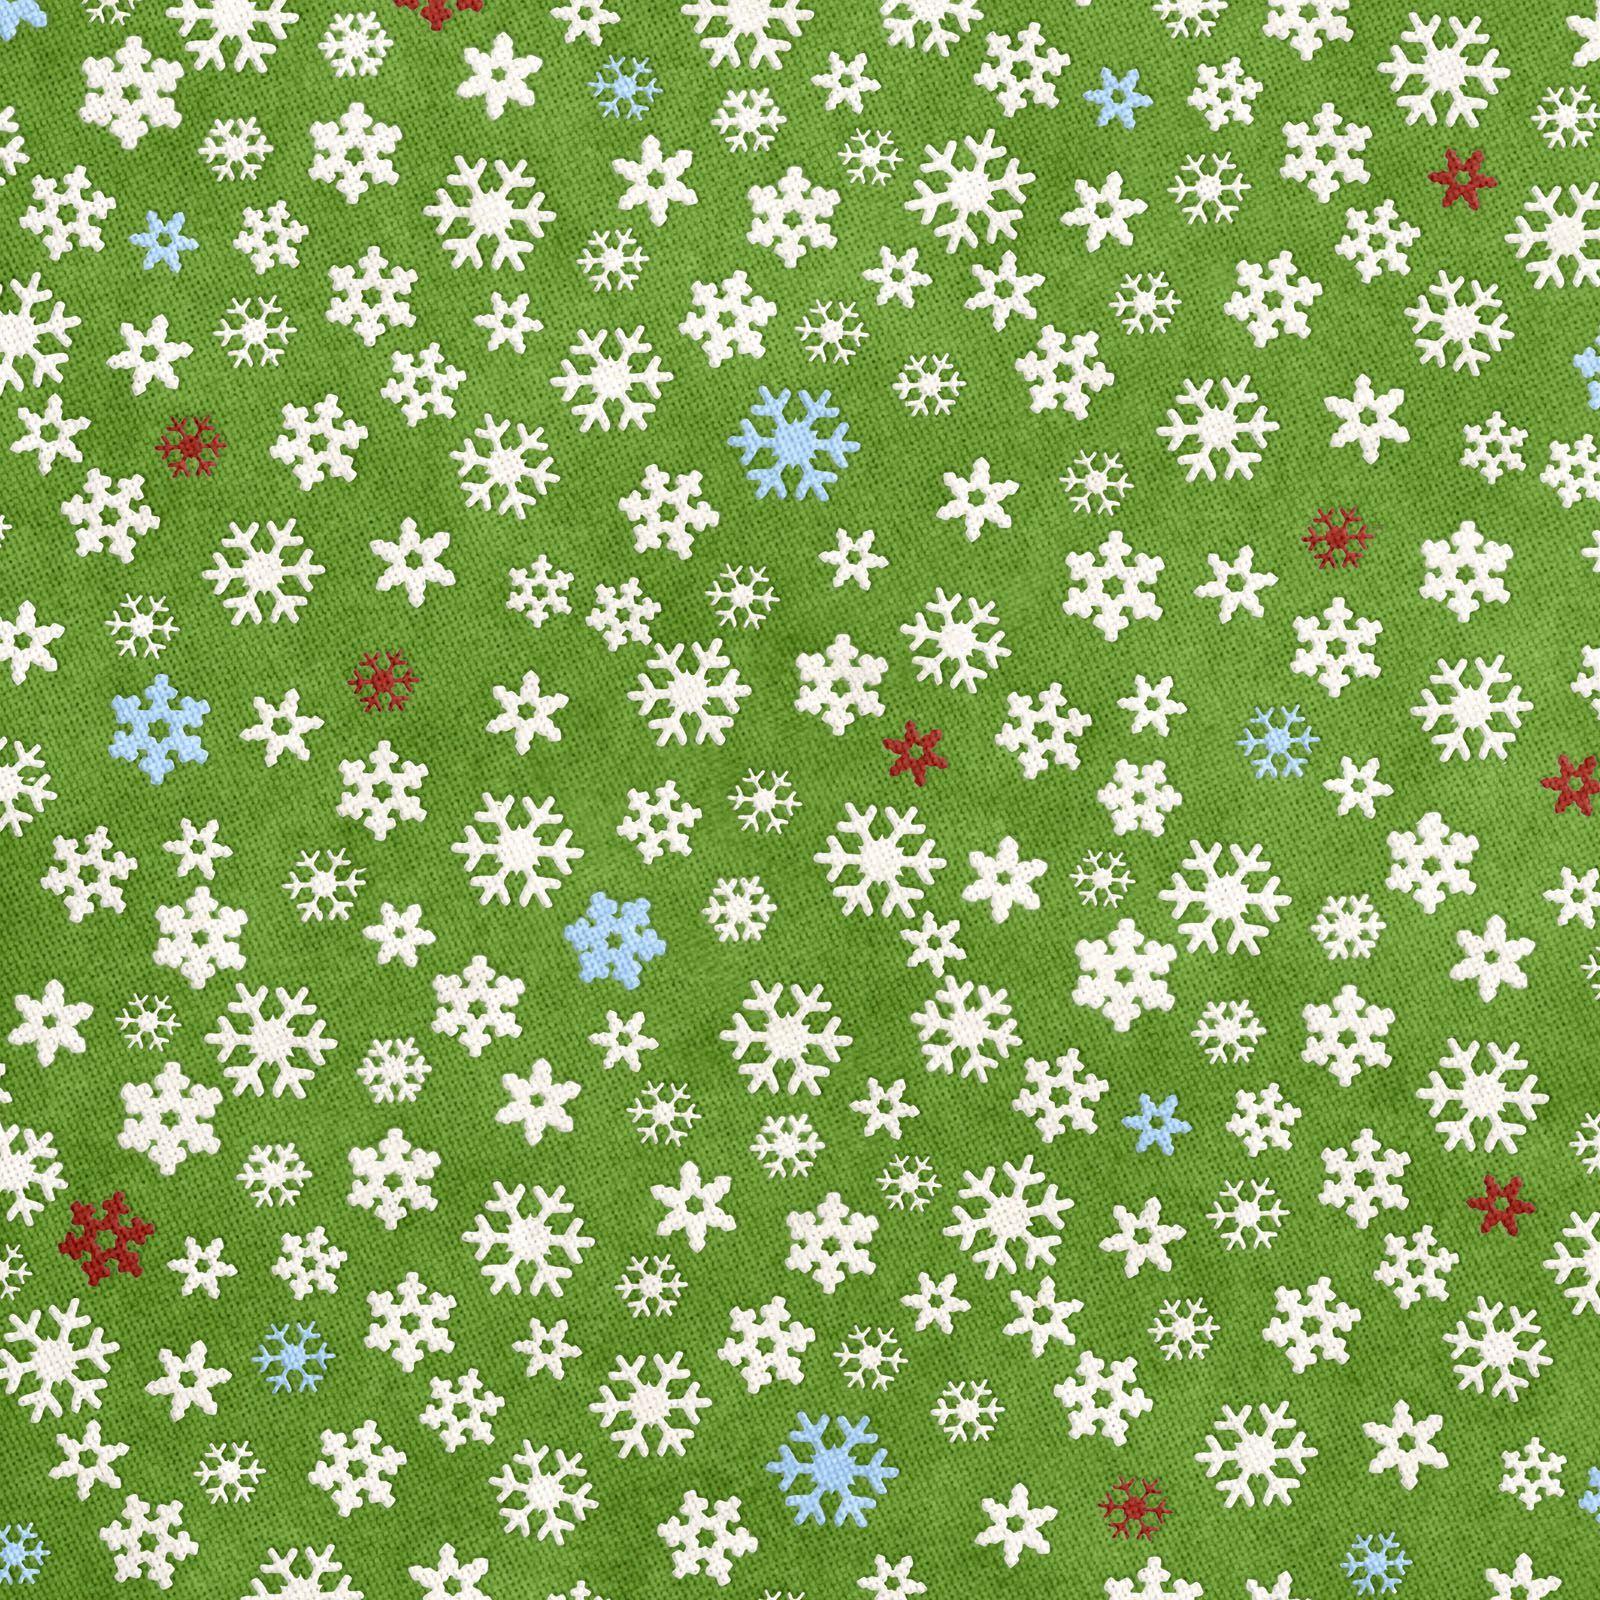 Free Printable Christmas Wrapping or Scrapbook Paper, IMG HEAVY